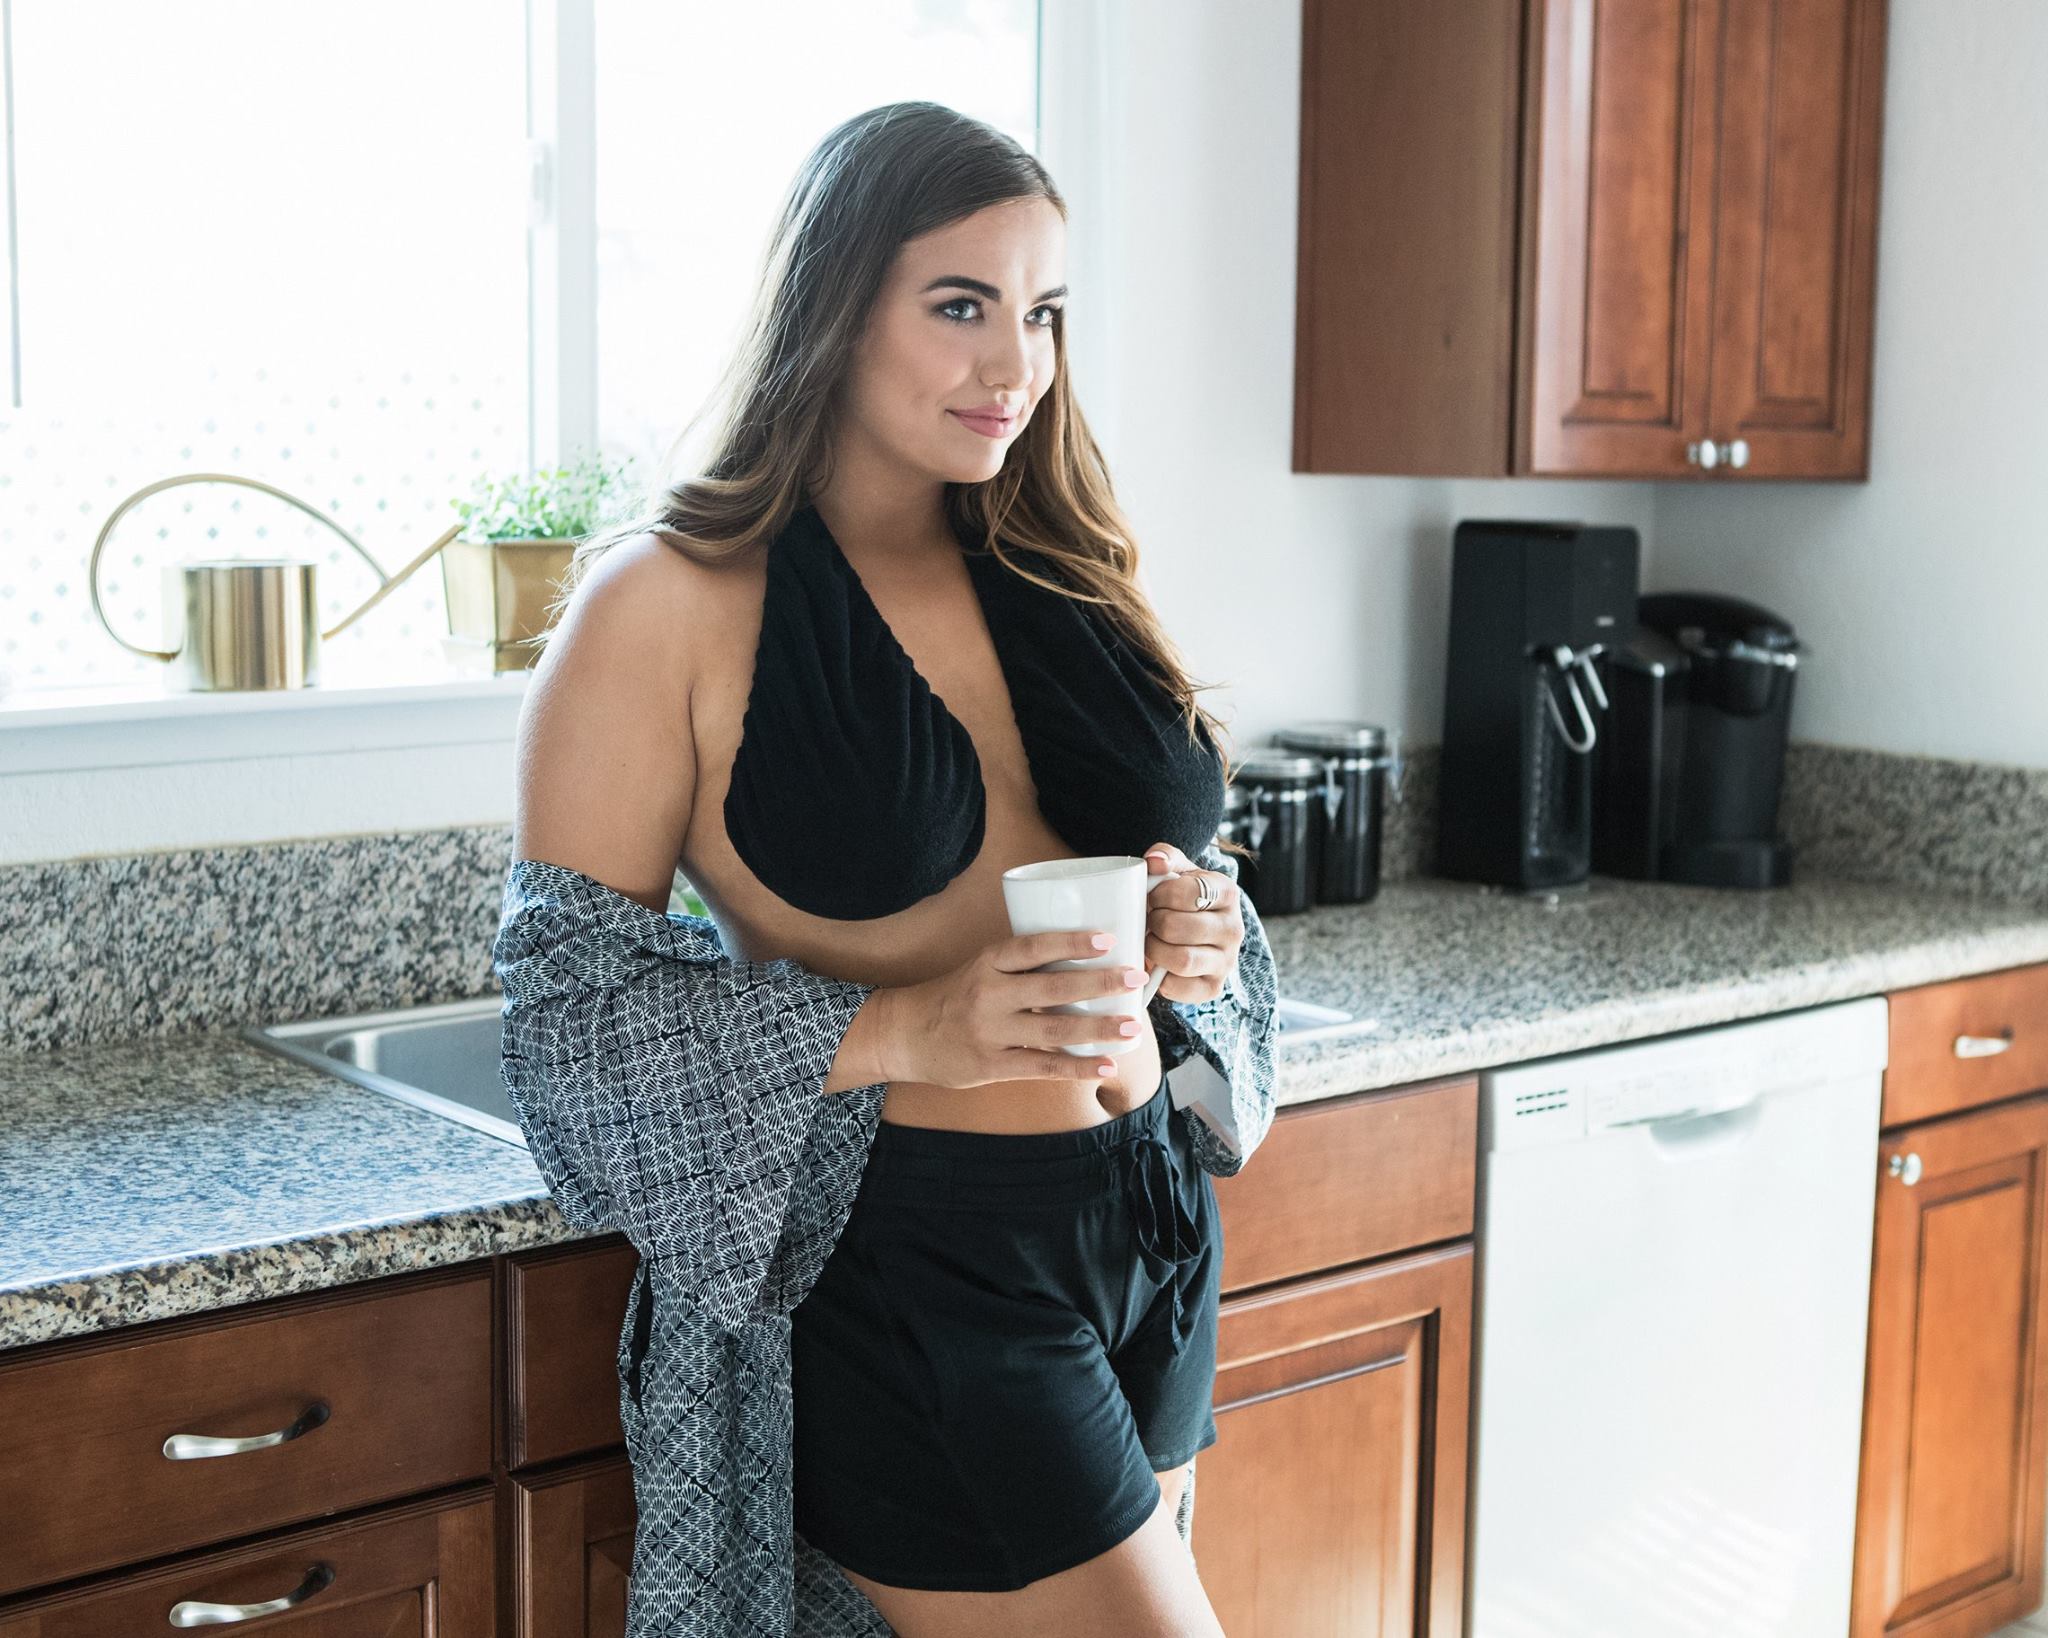 Ta-Ta-Towel: The breast accessory you didn't know you needed - NZ Herald